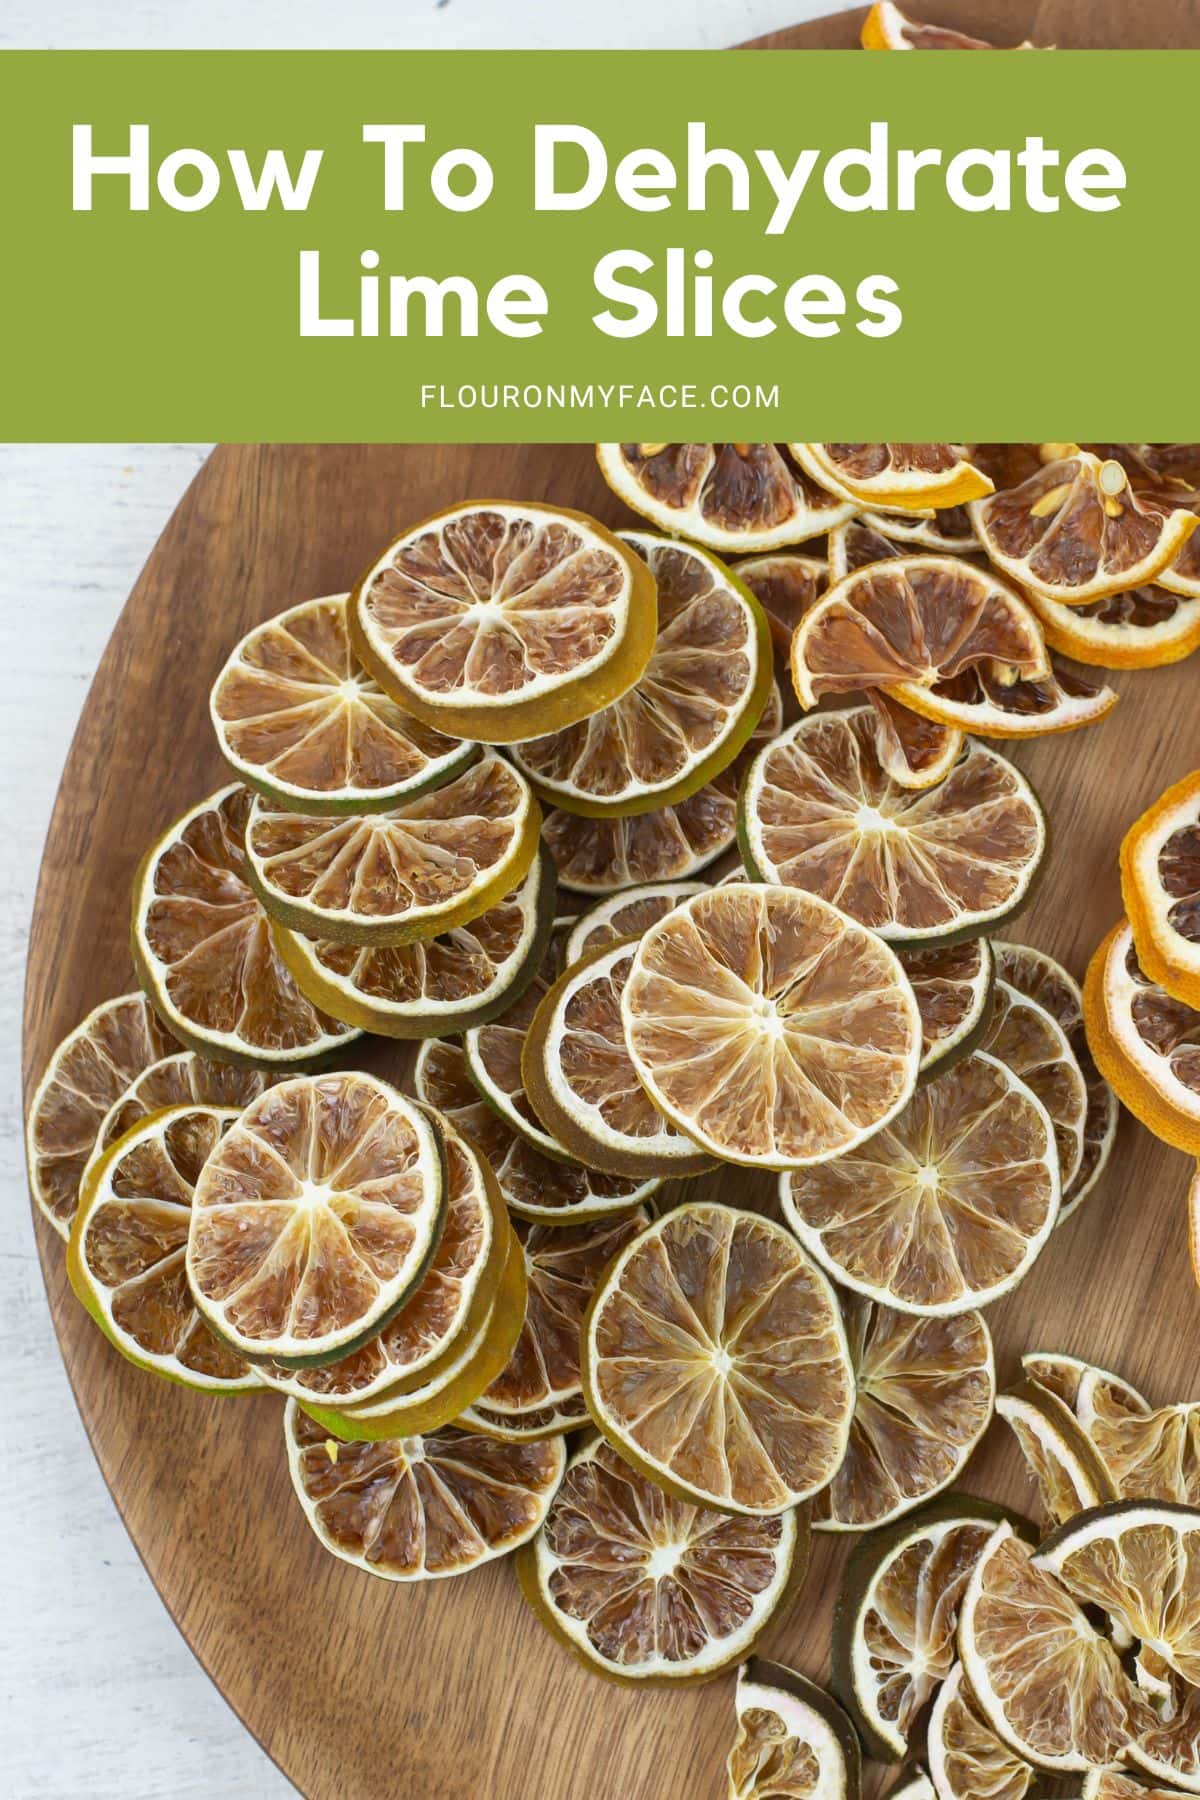 Dehydrated lime slices on a round wooden board.